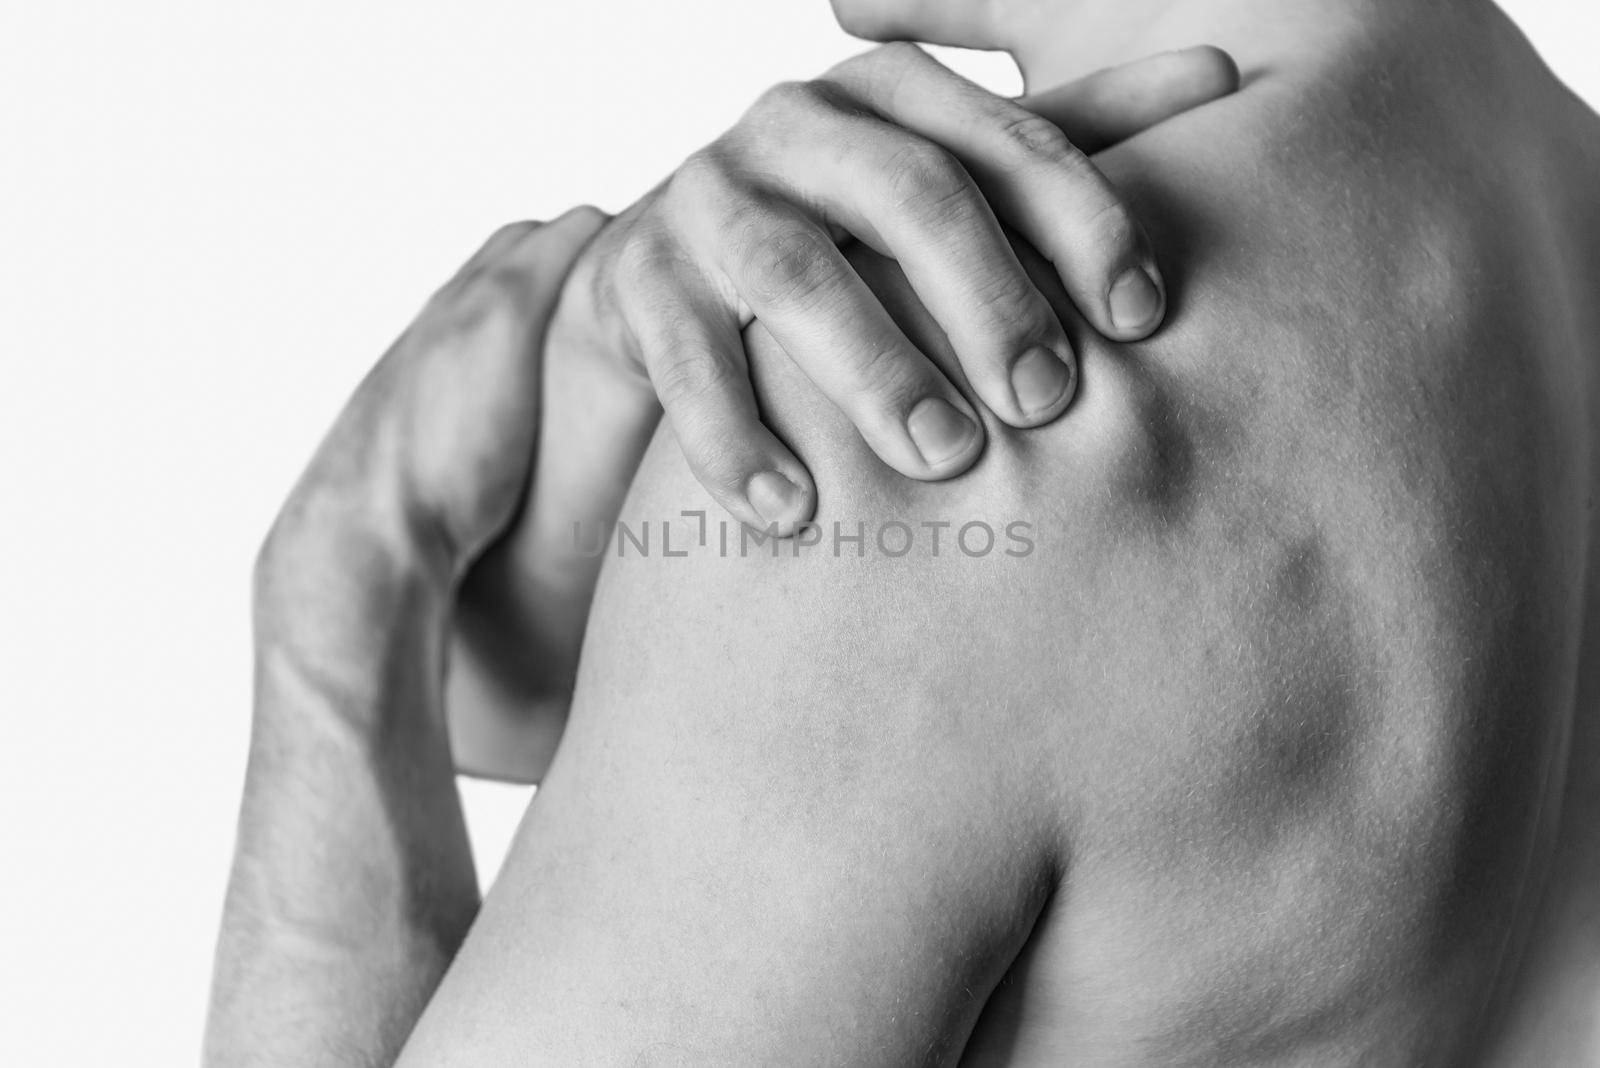 Man compresses his shoulder, pain in the shoulder. Monochrome image, isolated on a white background